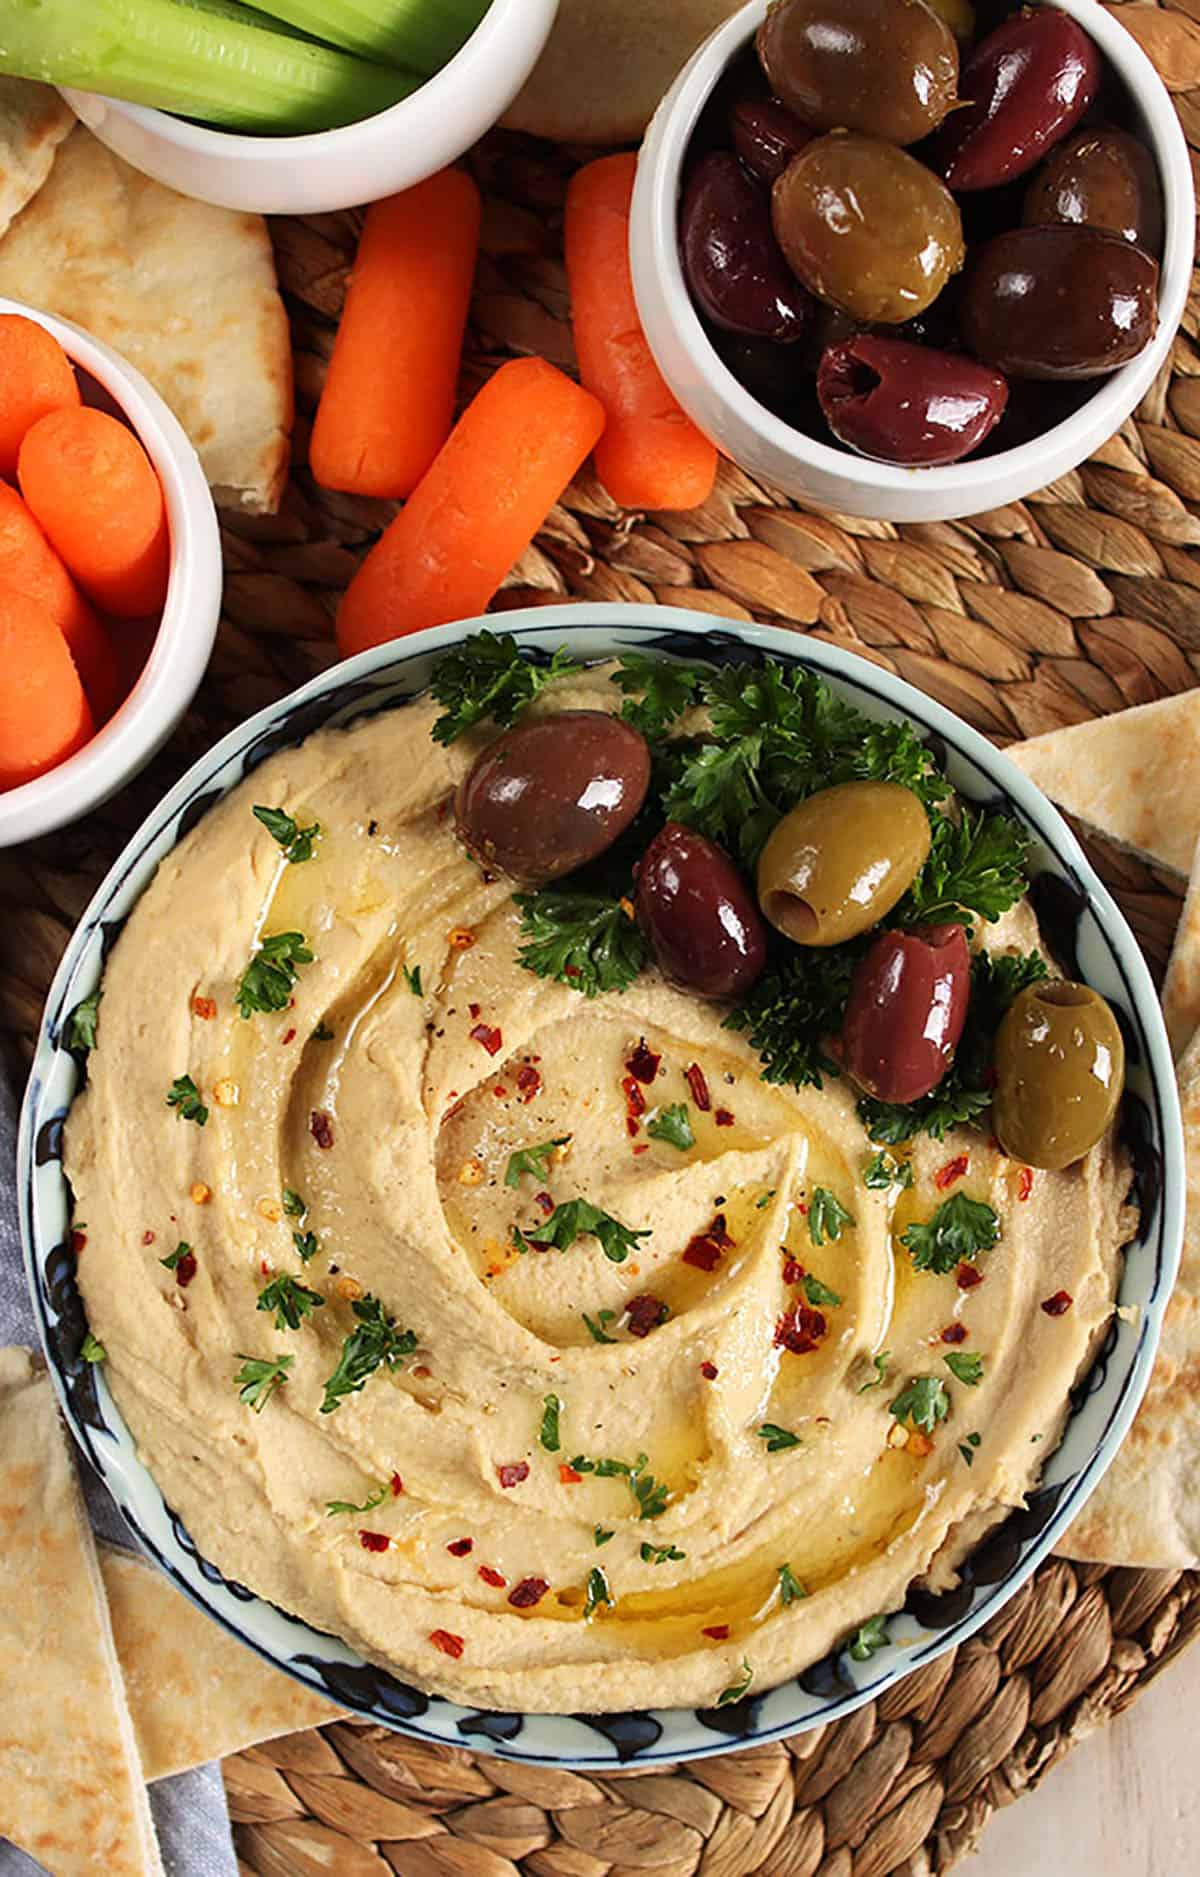 Hummus in a bowl topped with olives on a wicker placemat with pita wedges, carrots and celery for dipping.